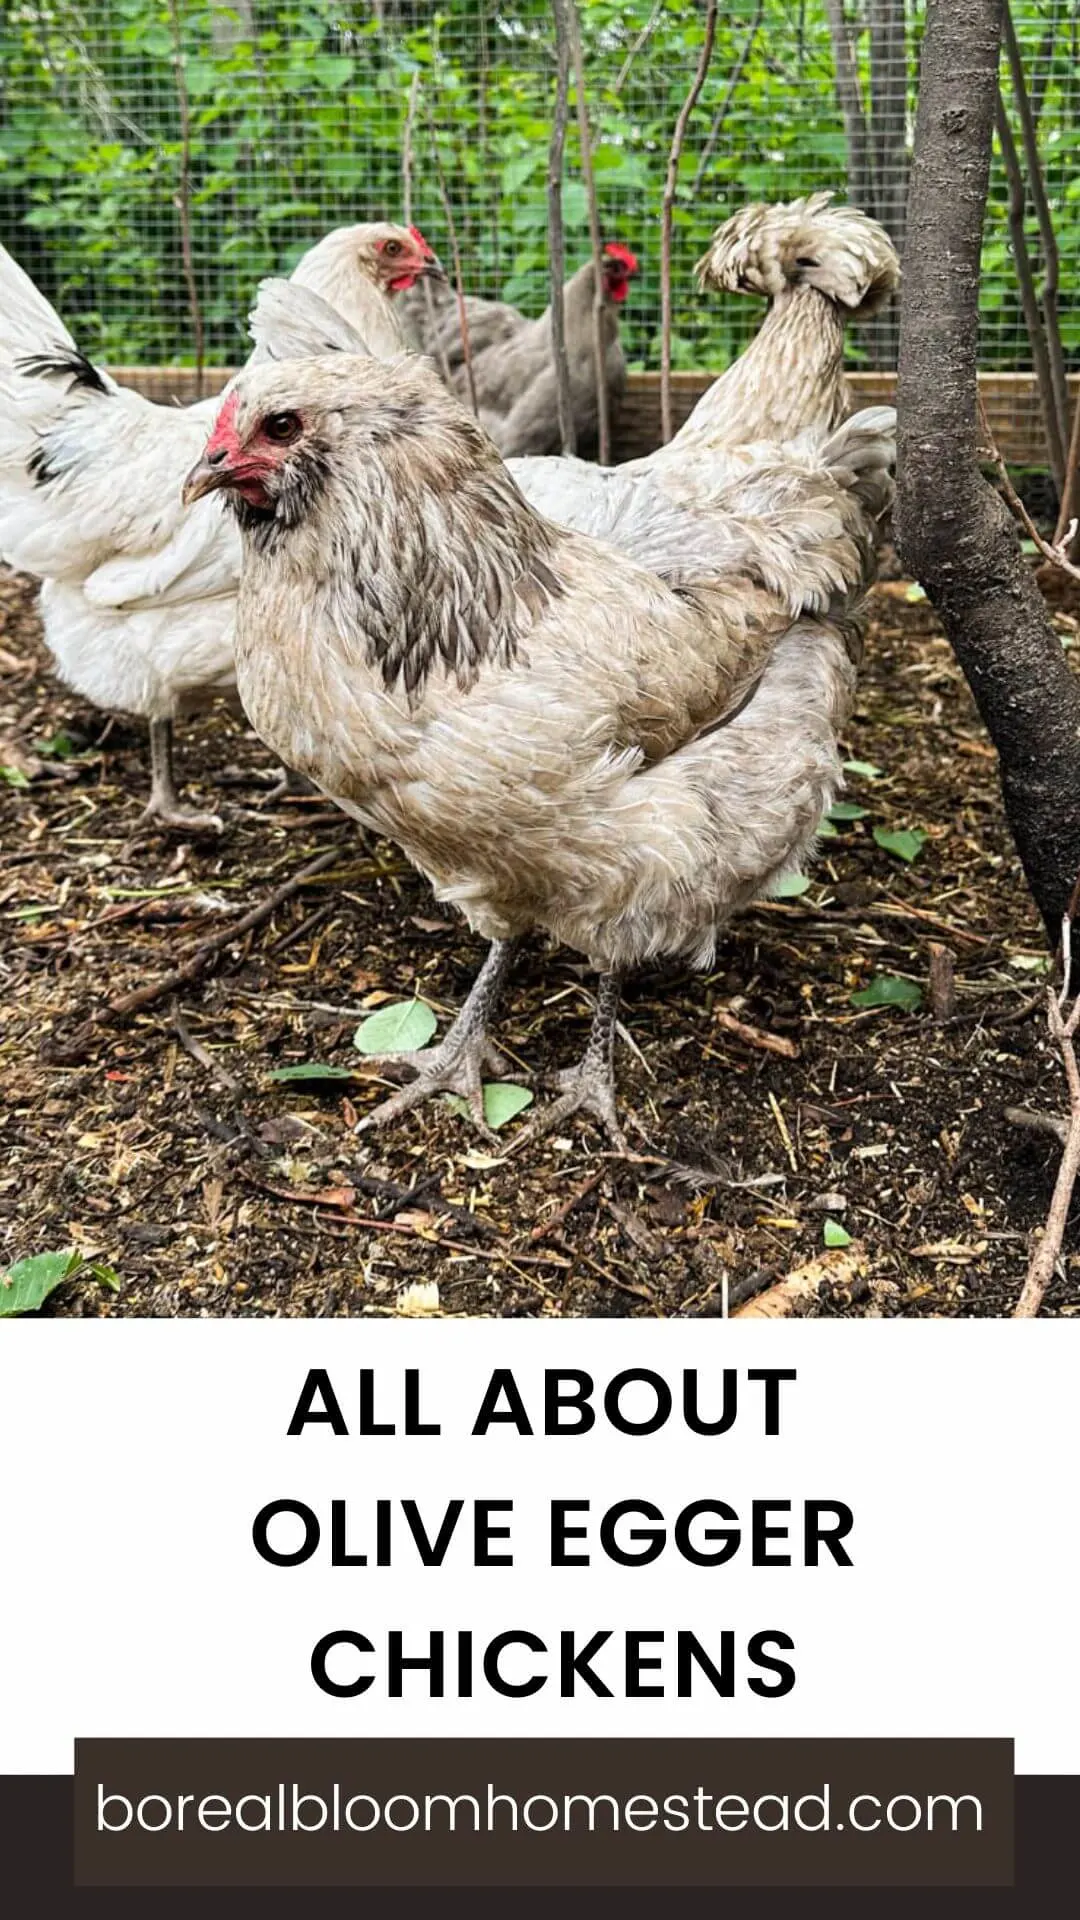 Chickens with text overlay: All about olive egger chickens.